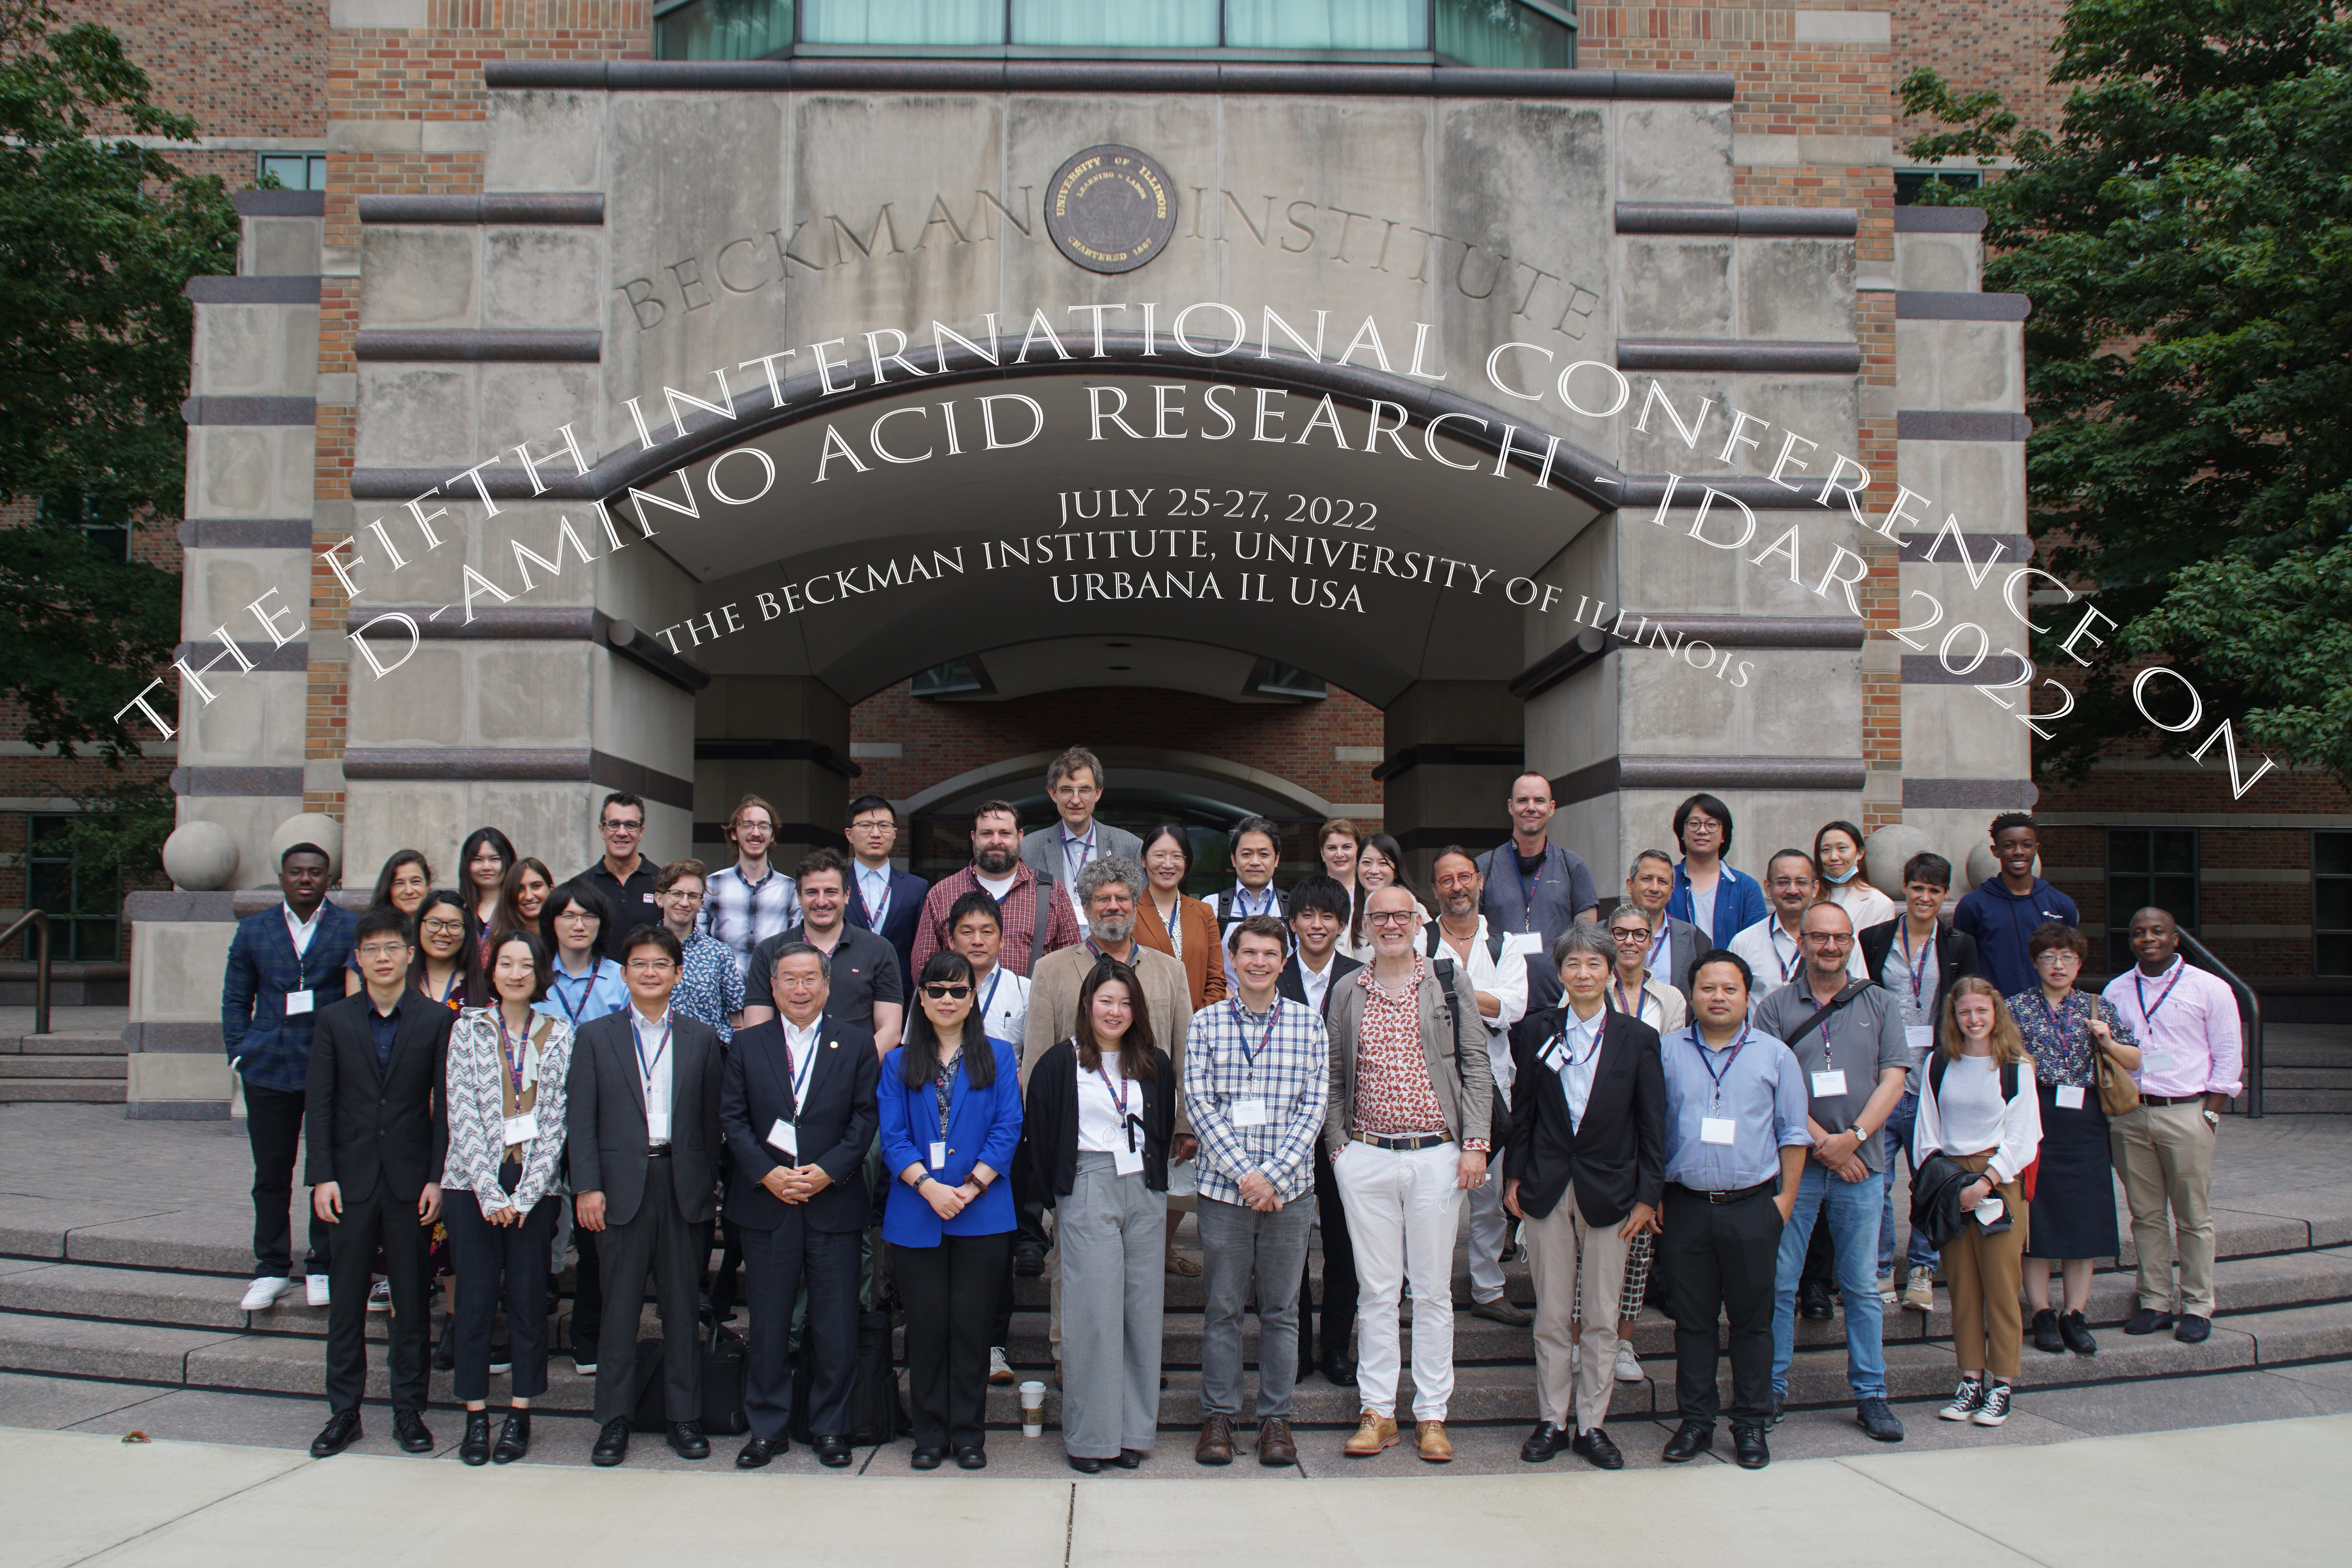 Group photo of IDAR 2022 participants in front of Beckman Institute entrance